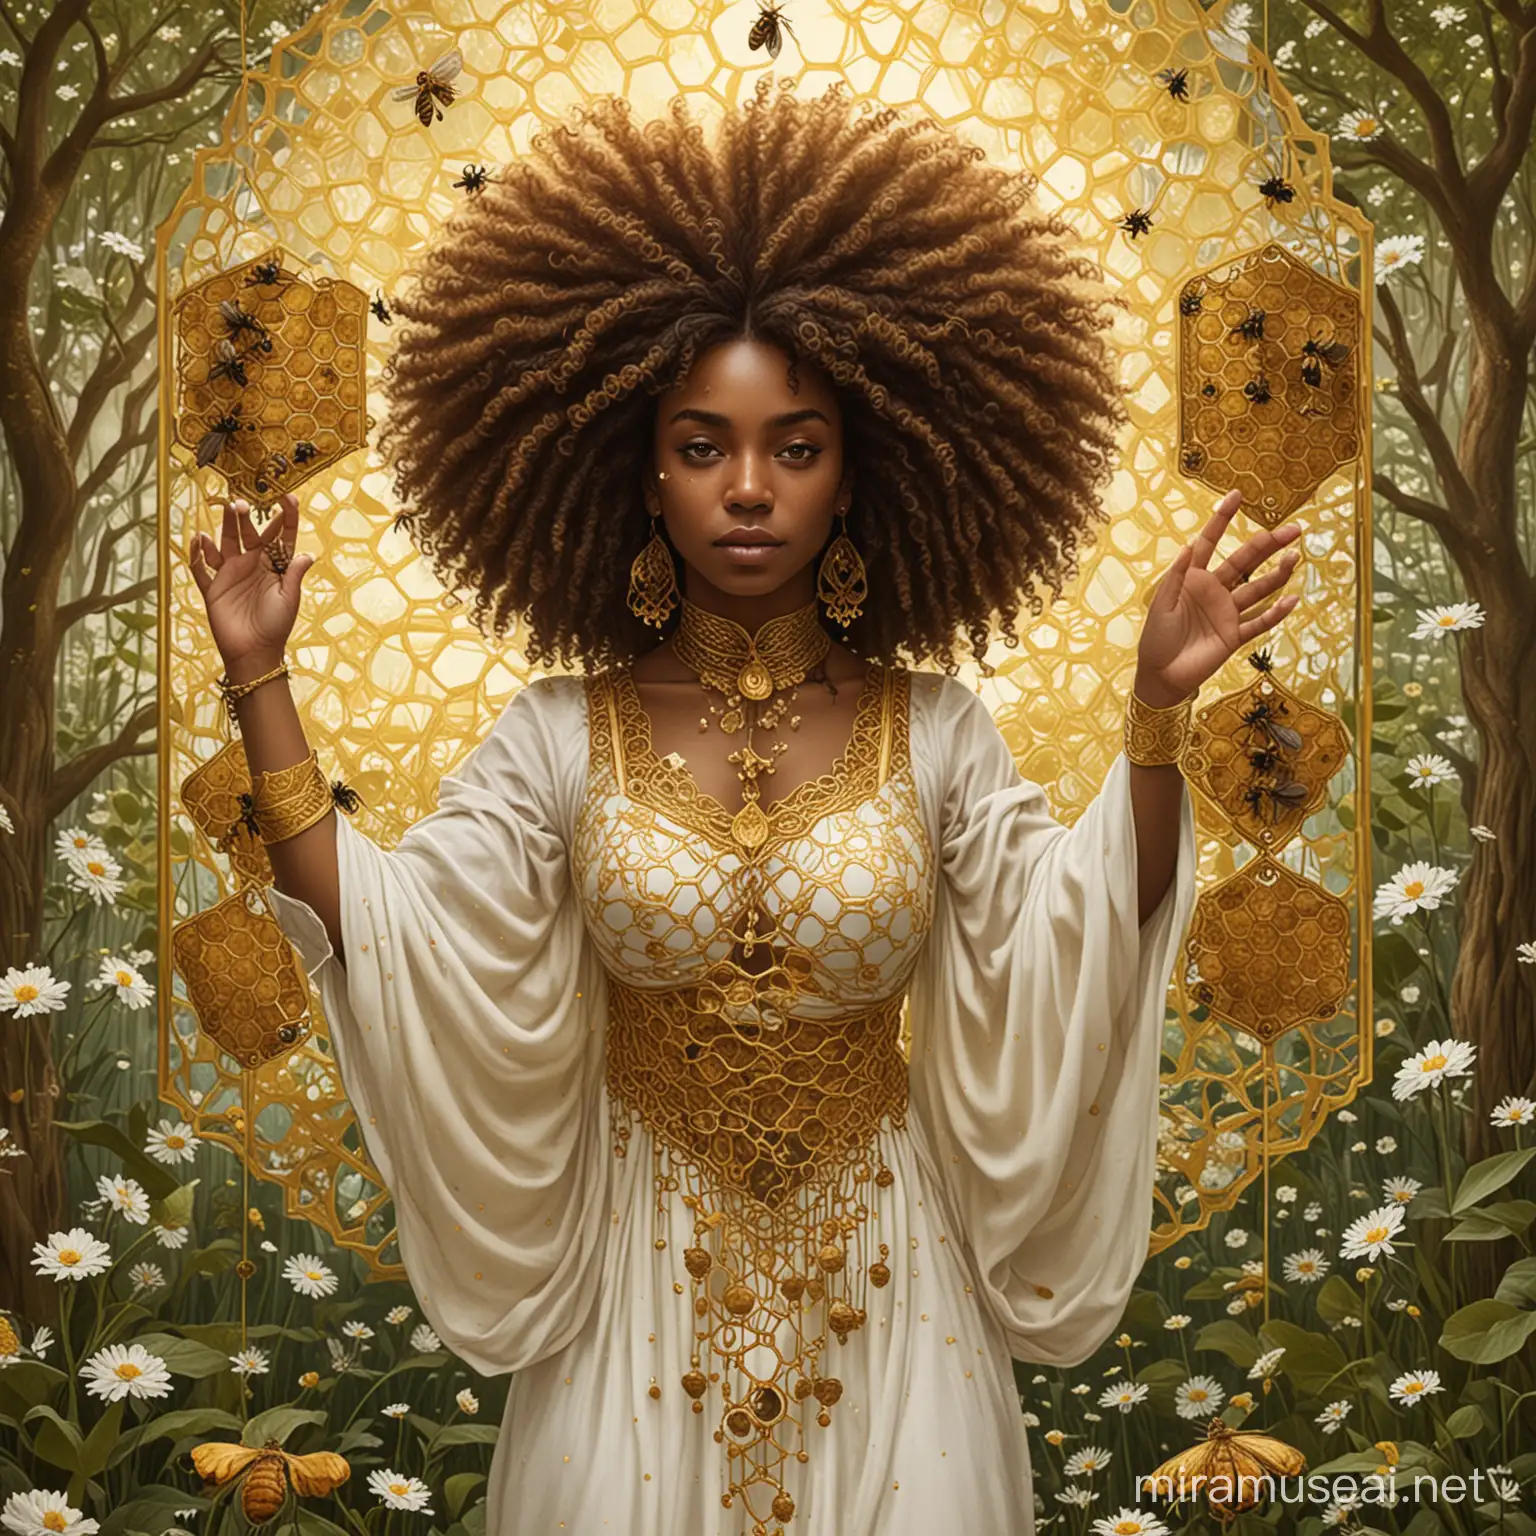 Create a tarot card that represents the hanged woman. She is Afro-Indigenous handling upside down from a Honeycomb with her hands behind her back. She has naturally curly hair and is dressed in gold and white with a enchanted garden full of honeybees